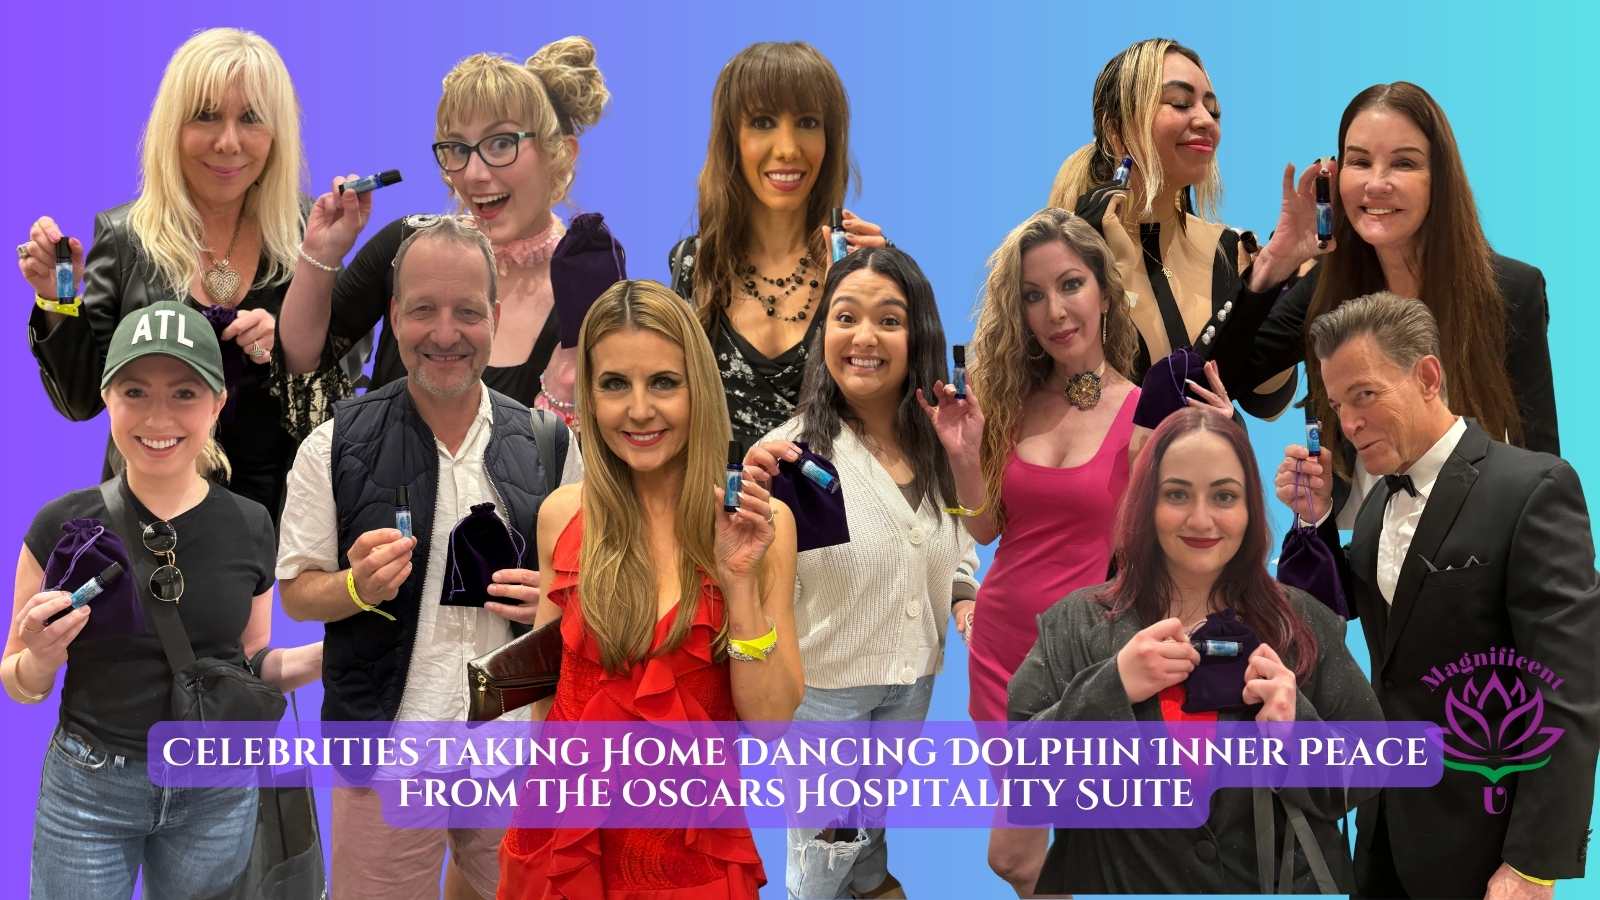 Dancing Dolphin Essences being enjoyed by Celebrities at the 2024 Oscars